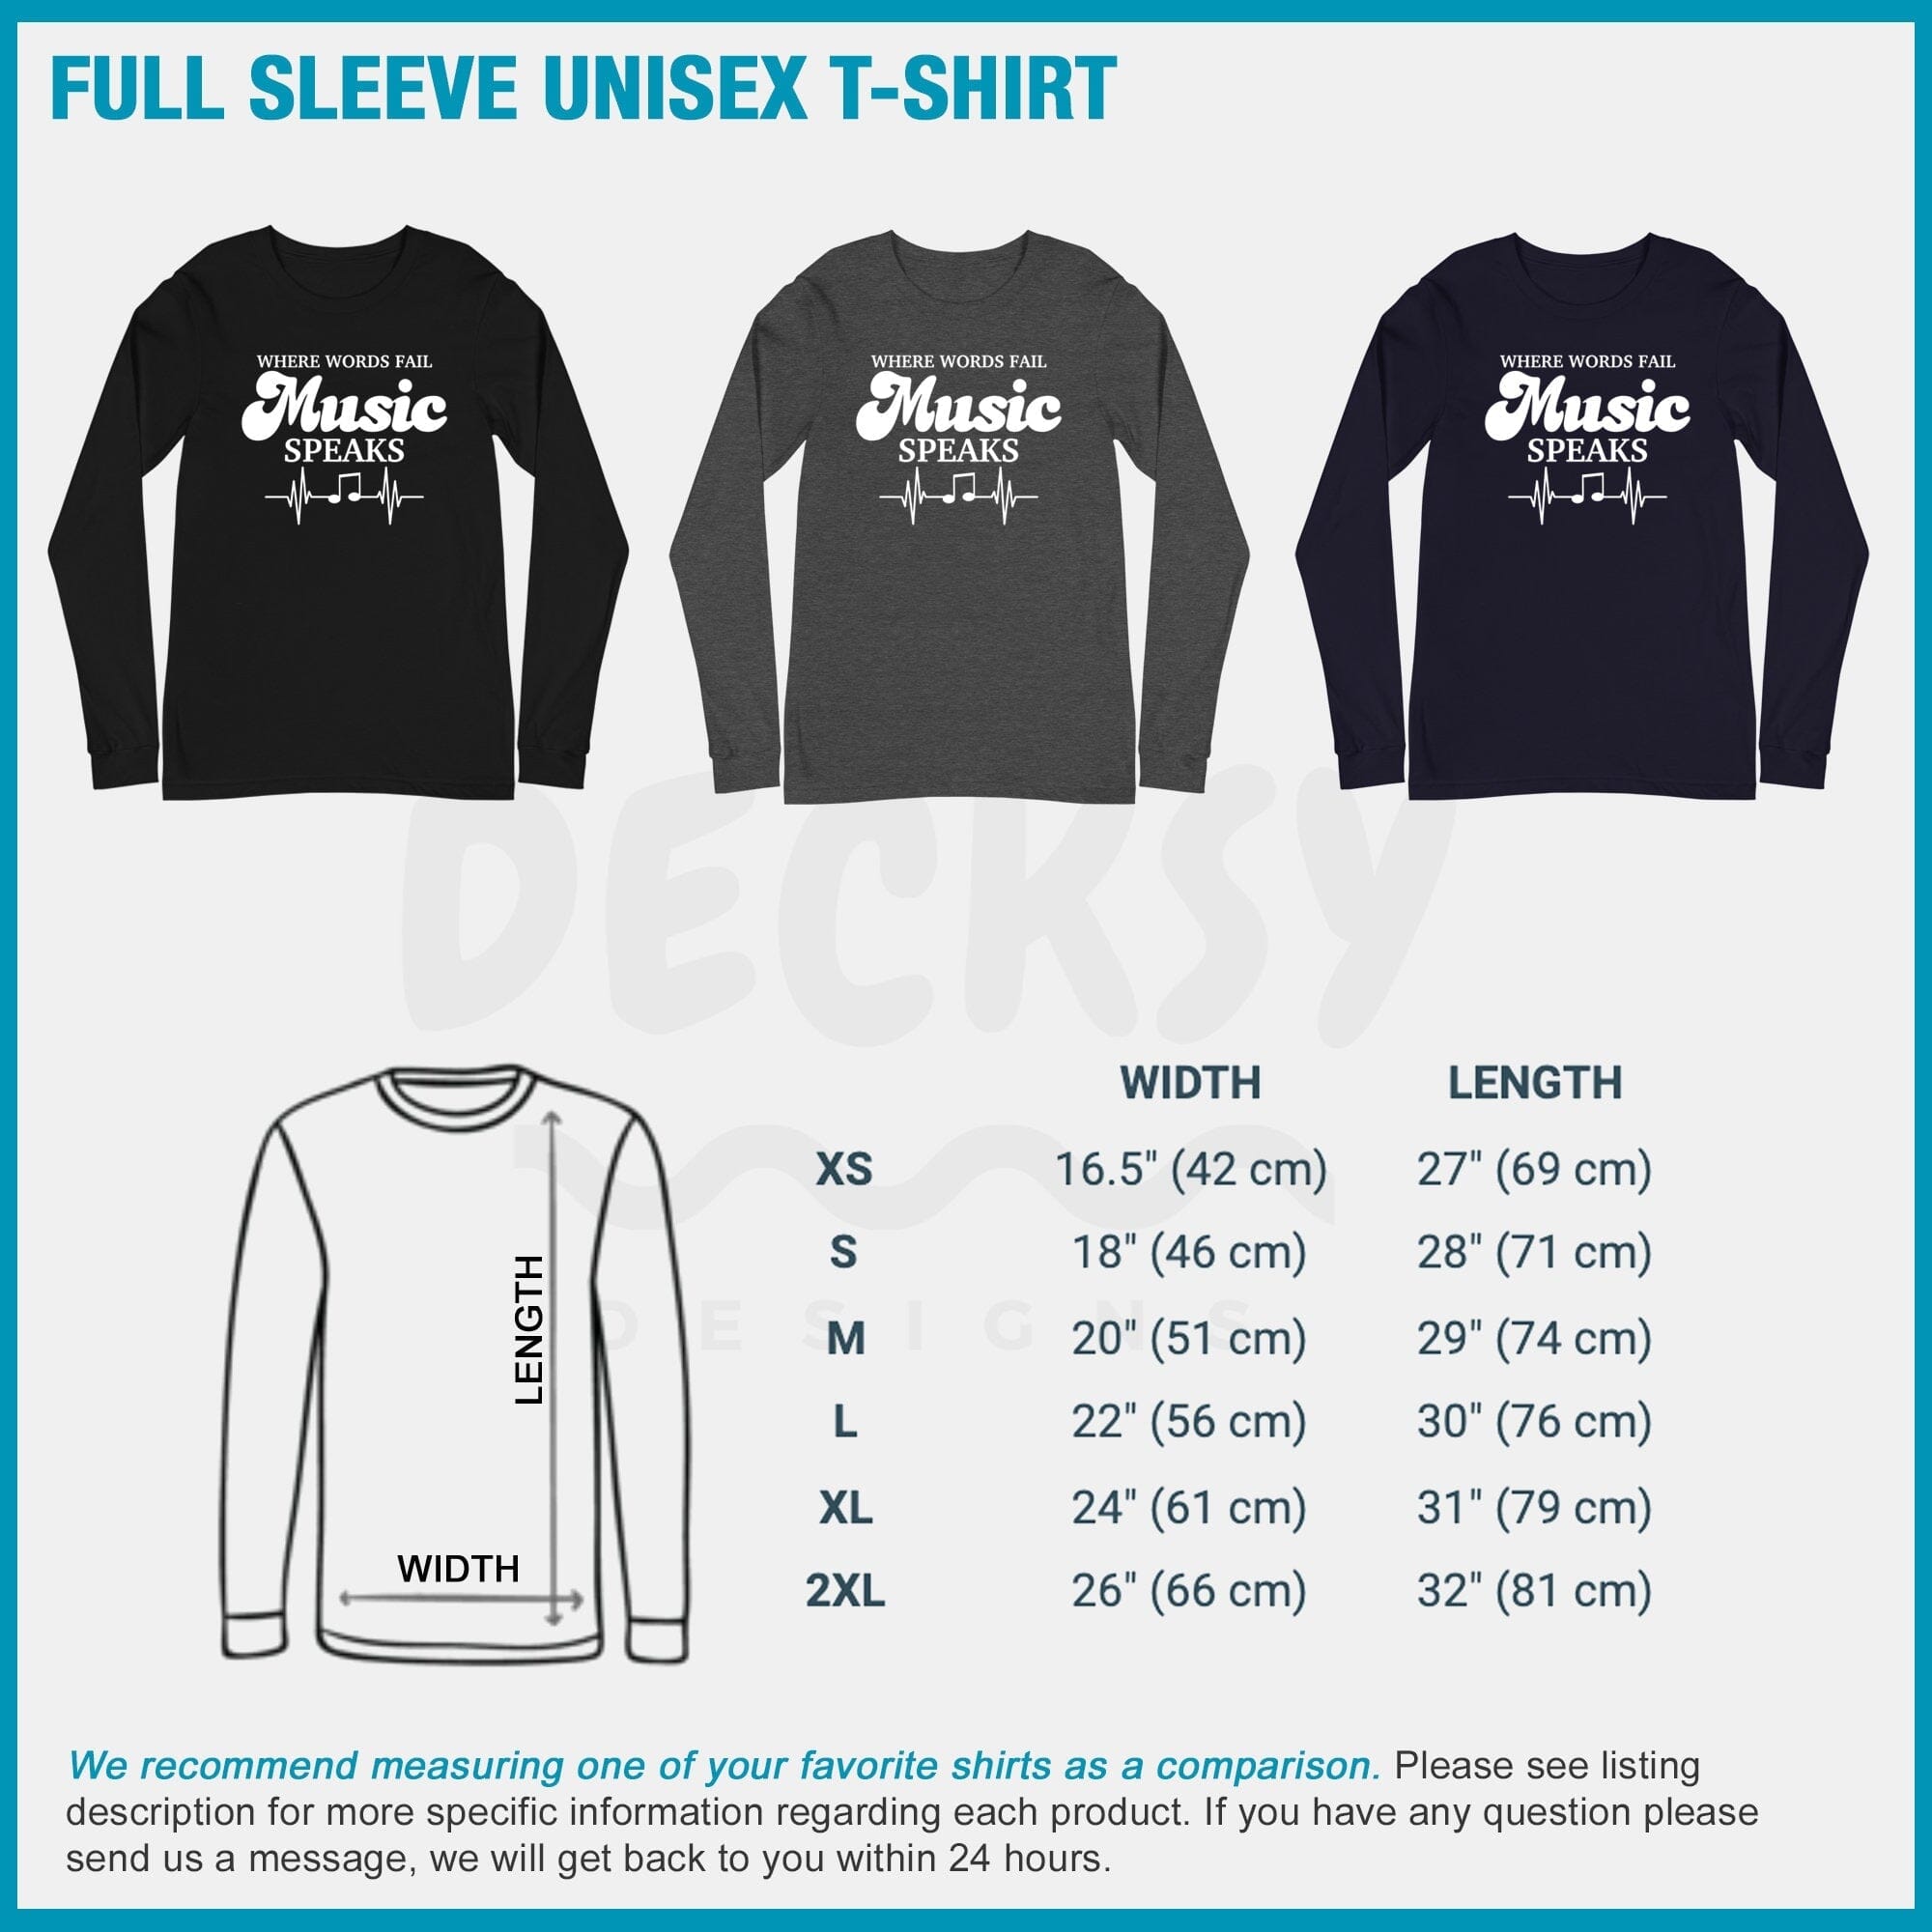 Musician Shirt, Music Teacher Gift-Clothing:Gender-Neutral Adult Clothing:Tops & Tees:T-shirts:Graphic Tees-DecksyDesigns